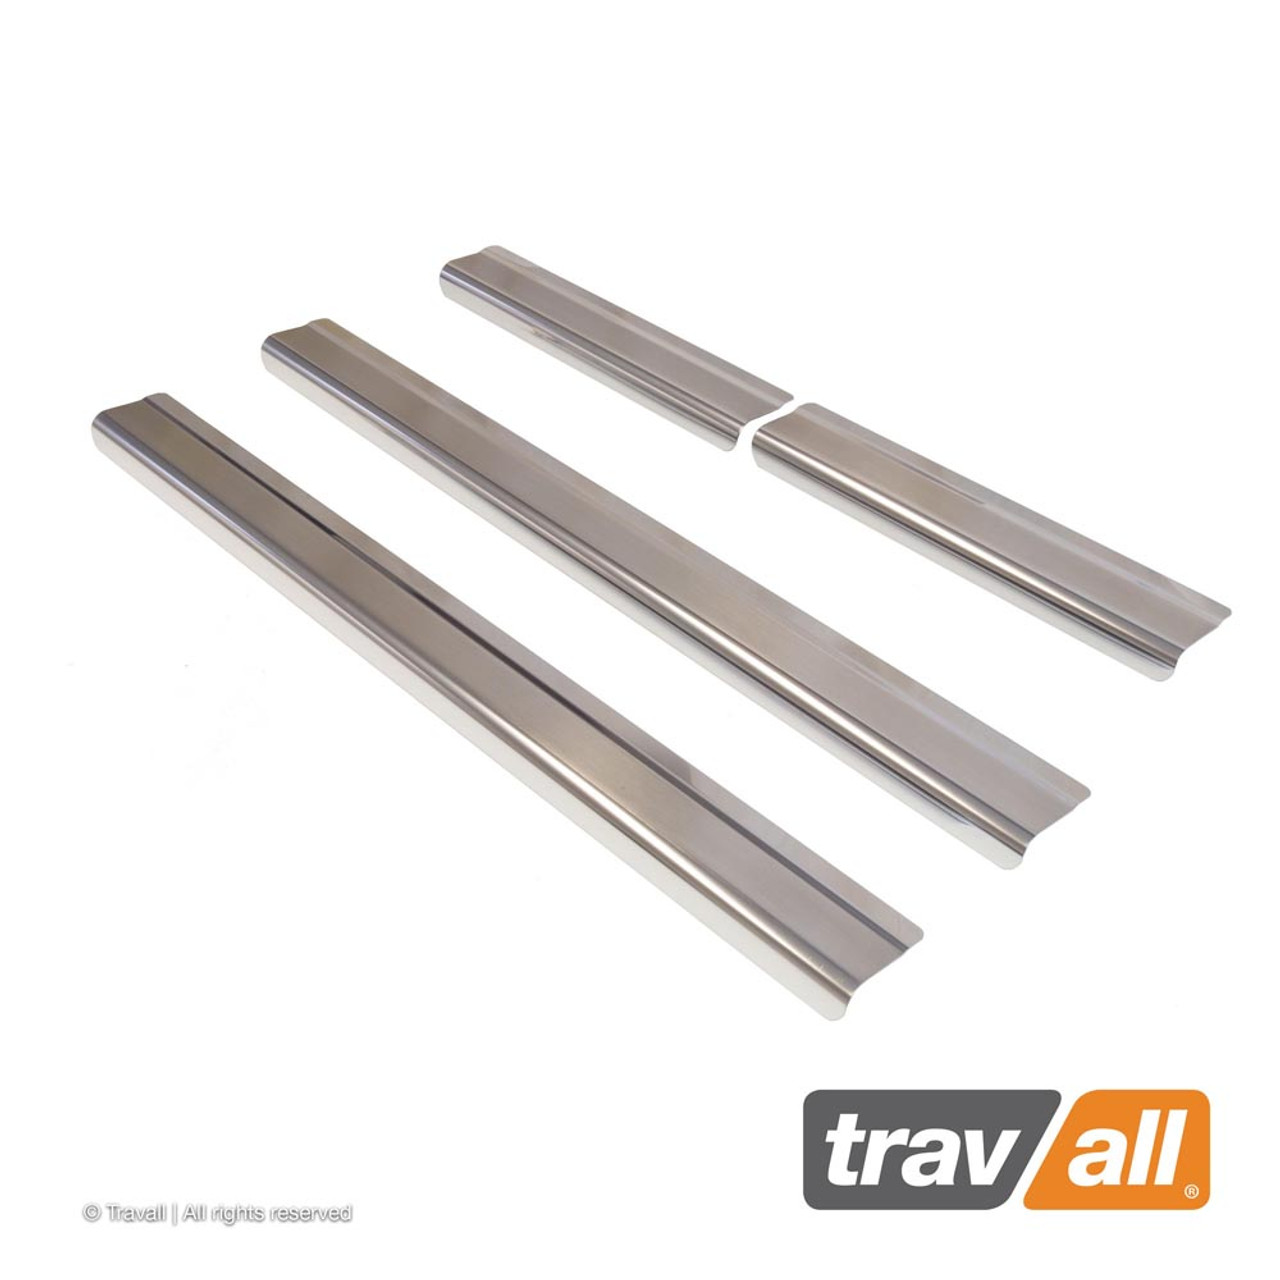 Travall Sill Guard for VW Passat Alltrack, Estate and Saloon 2005 to 2015